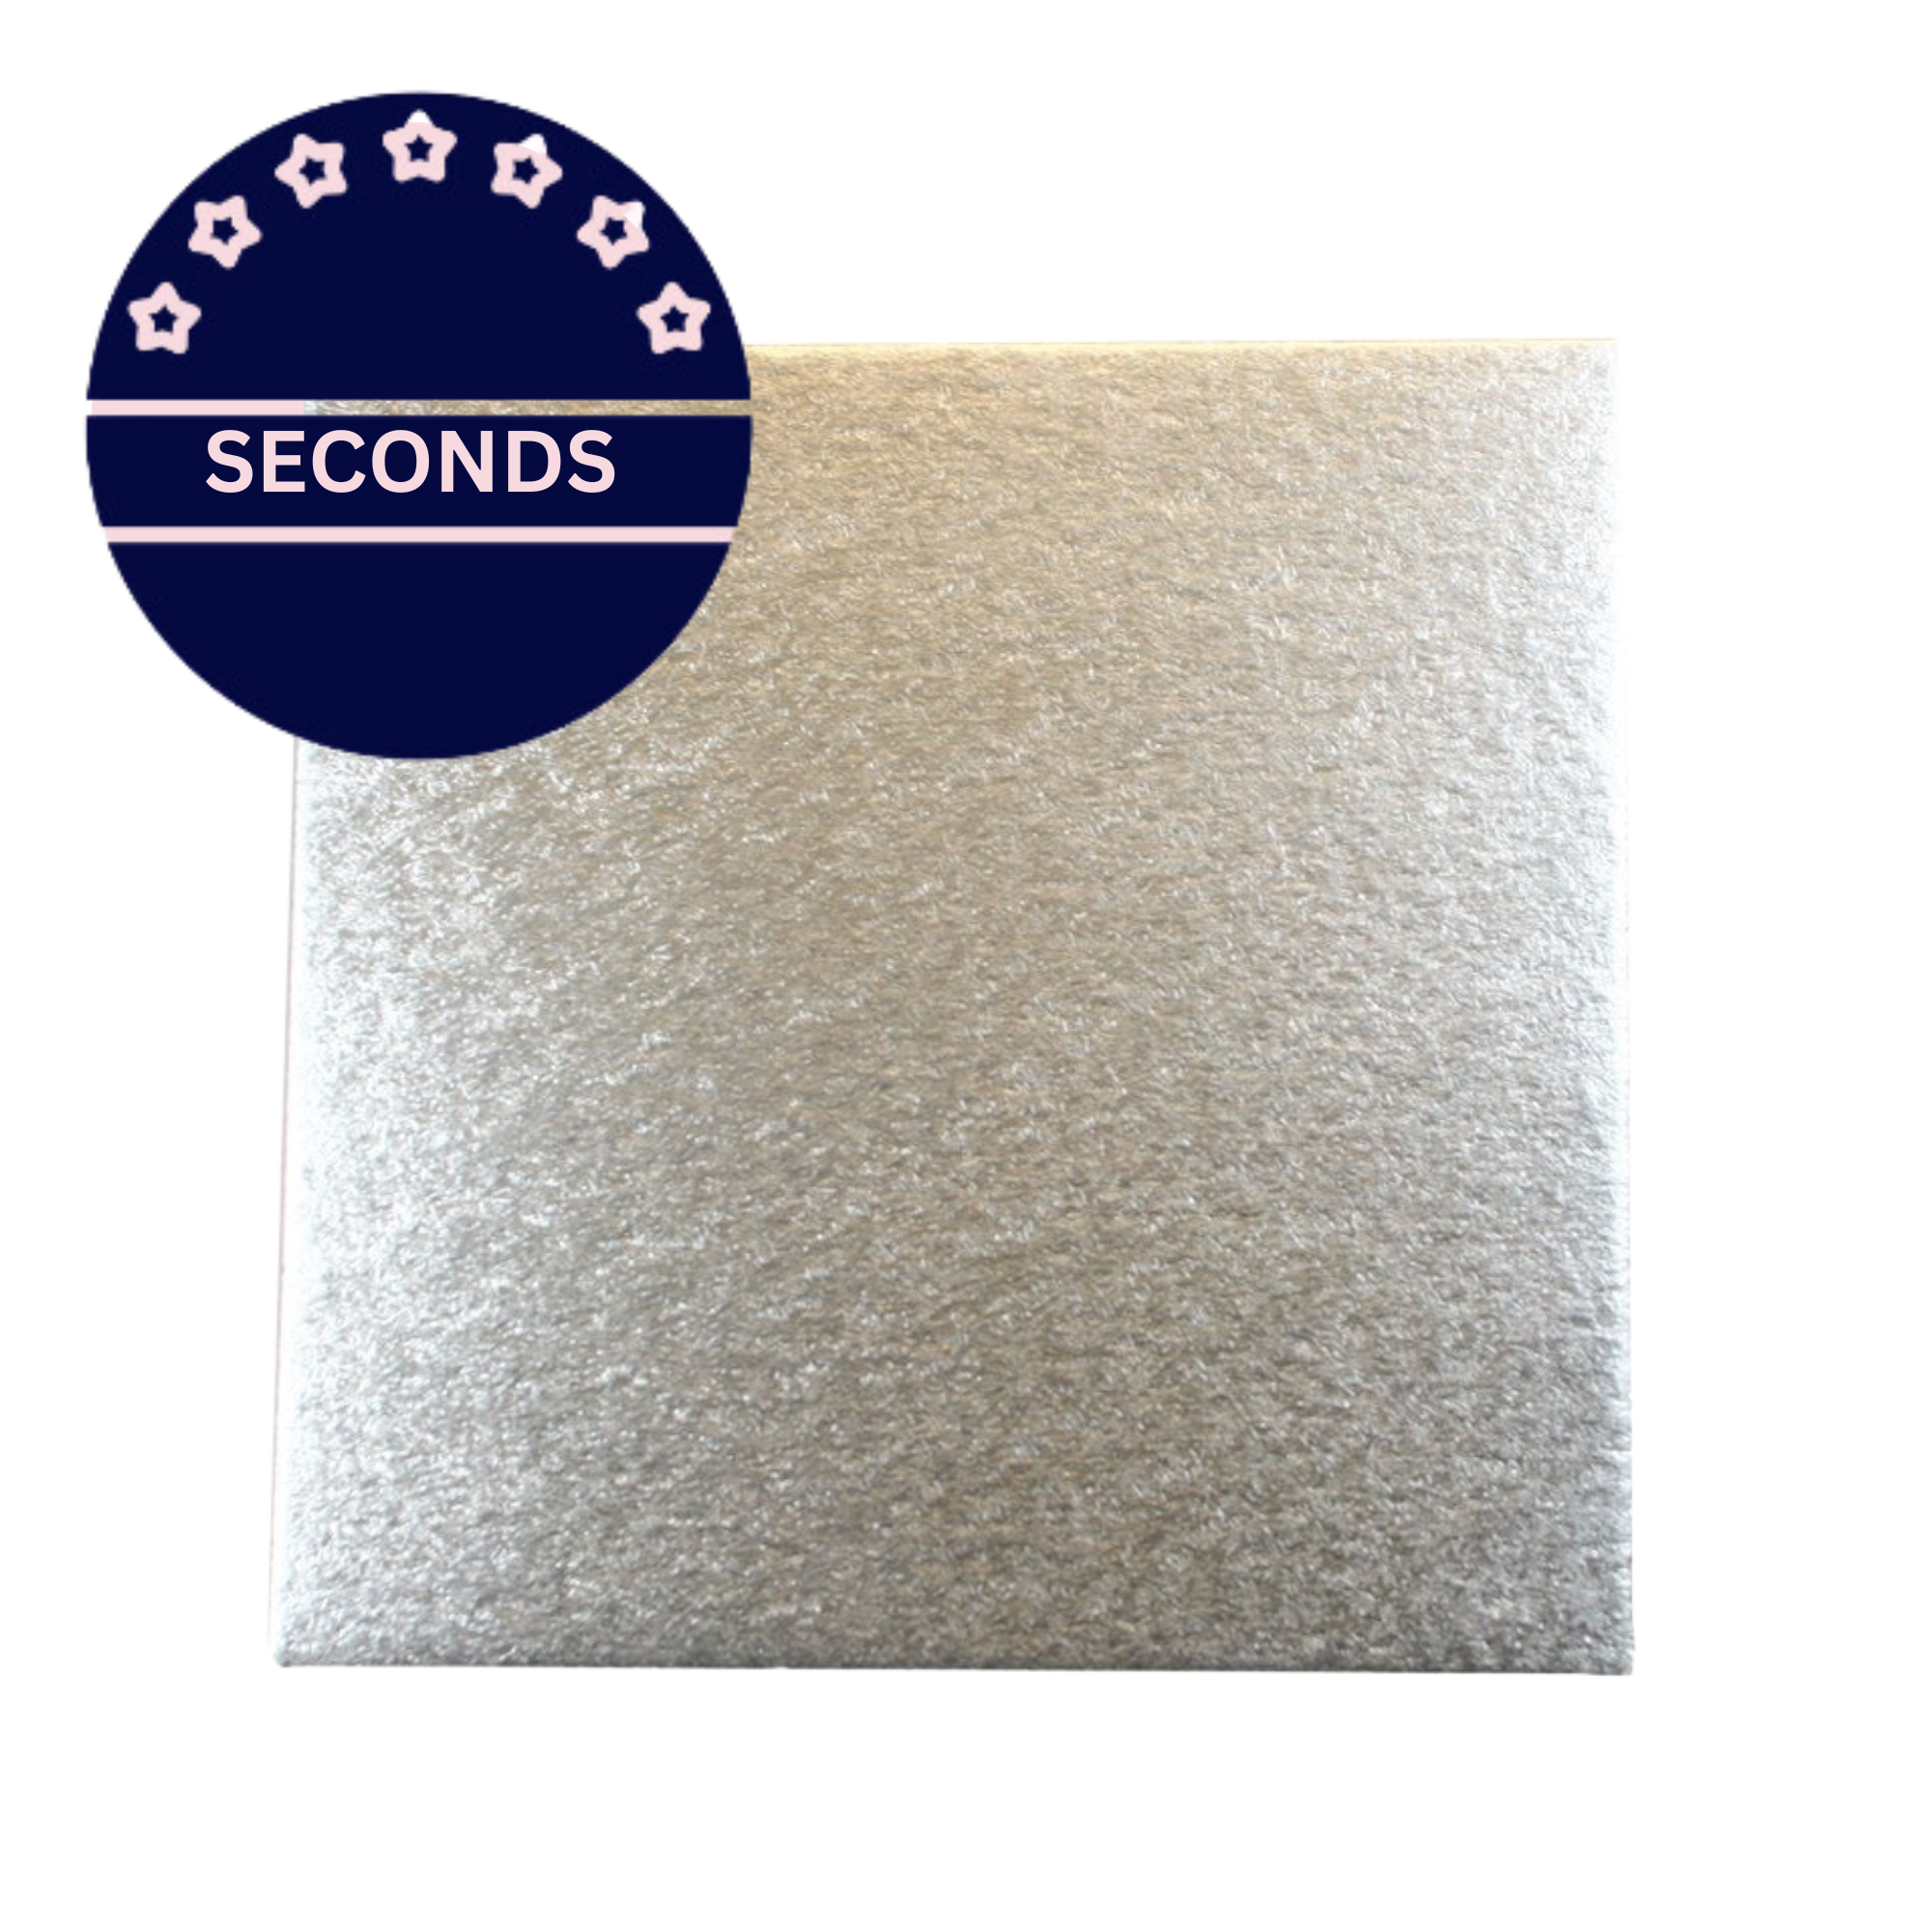 SECONDS - 12'' (304mm) Single Thick Square Turn Edge Cake Card Silver Fern